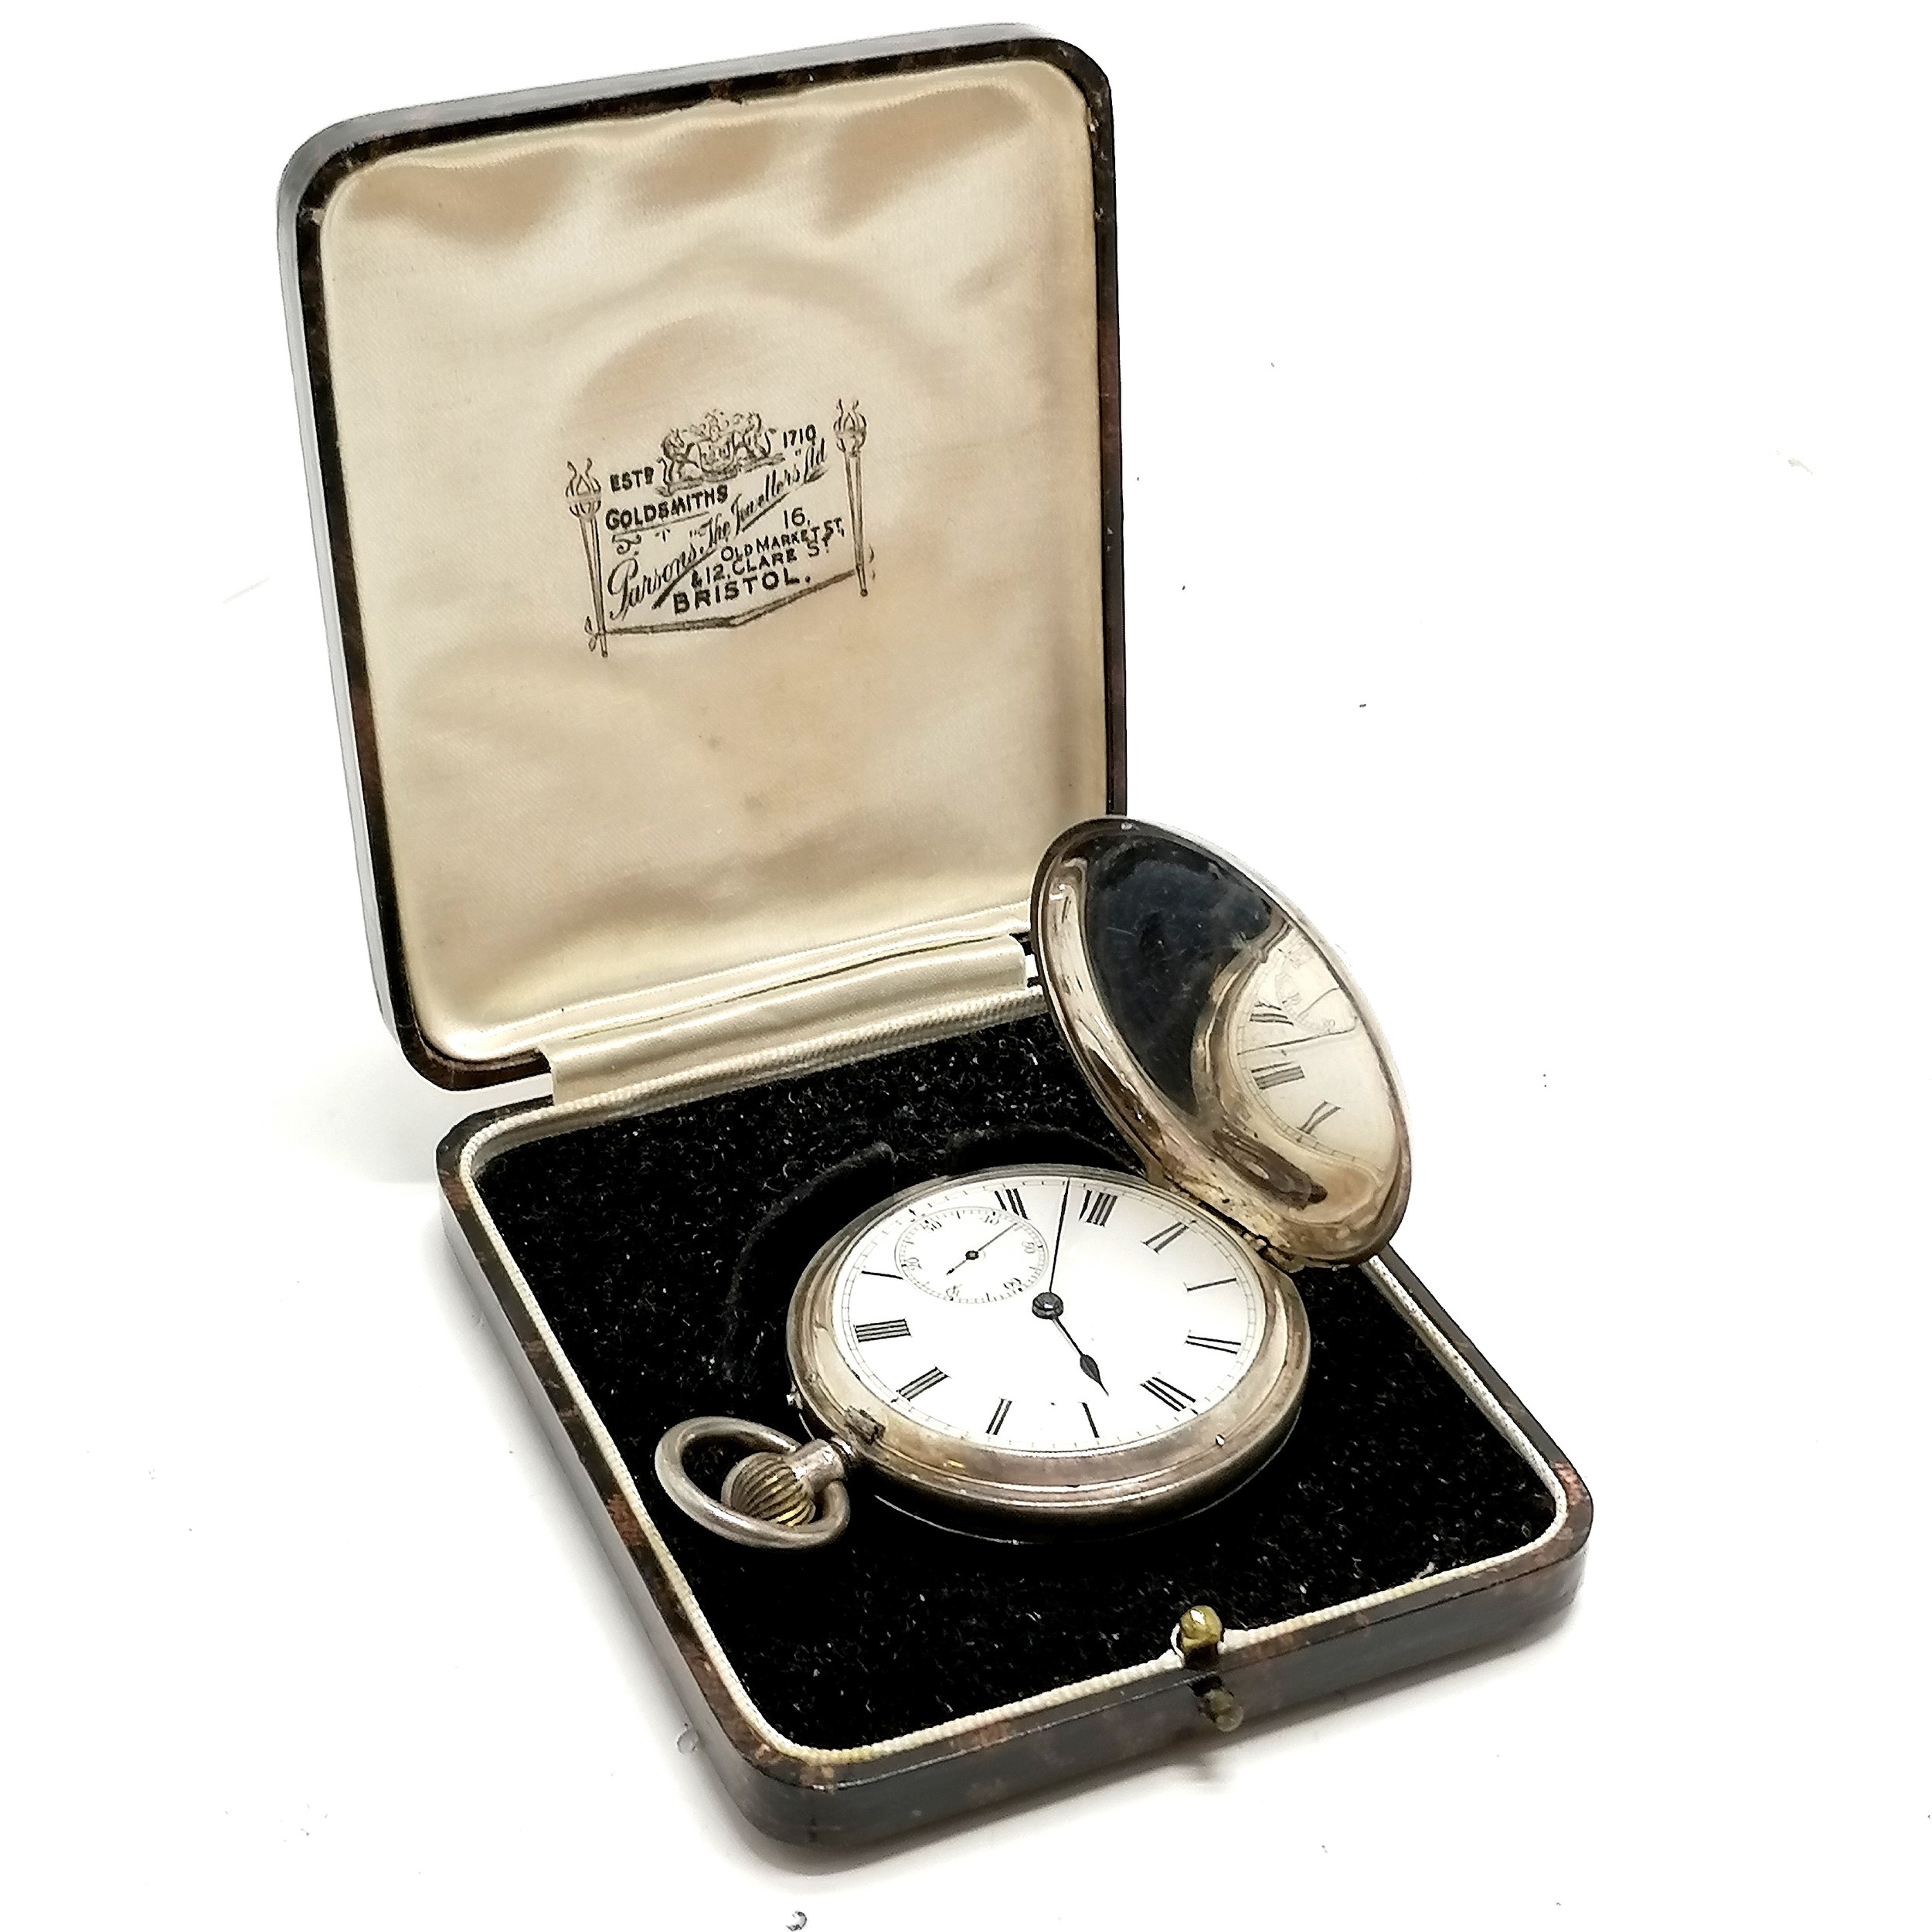 Antique silver full hunter pocket watch (48mm case) by Hall & Co (Manchester) in Parsons retail